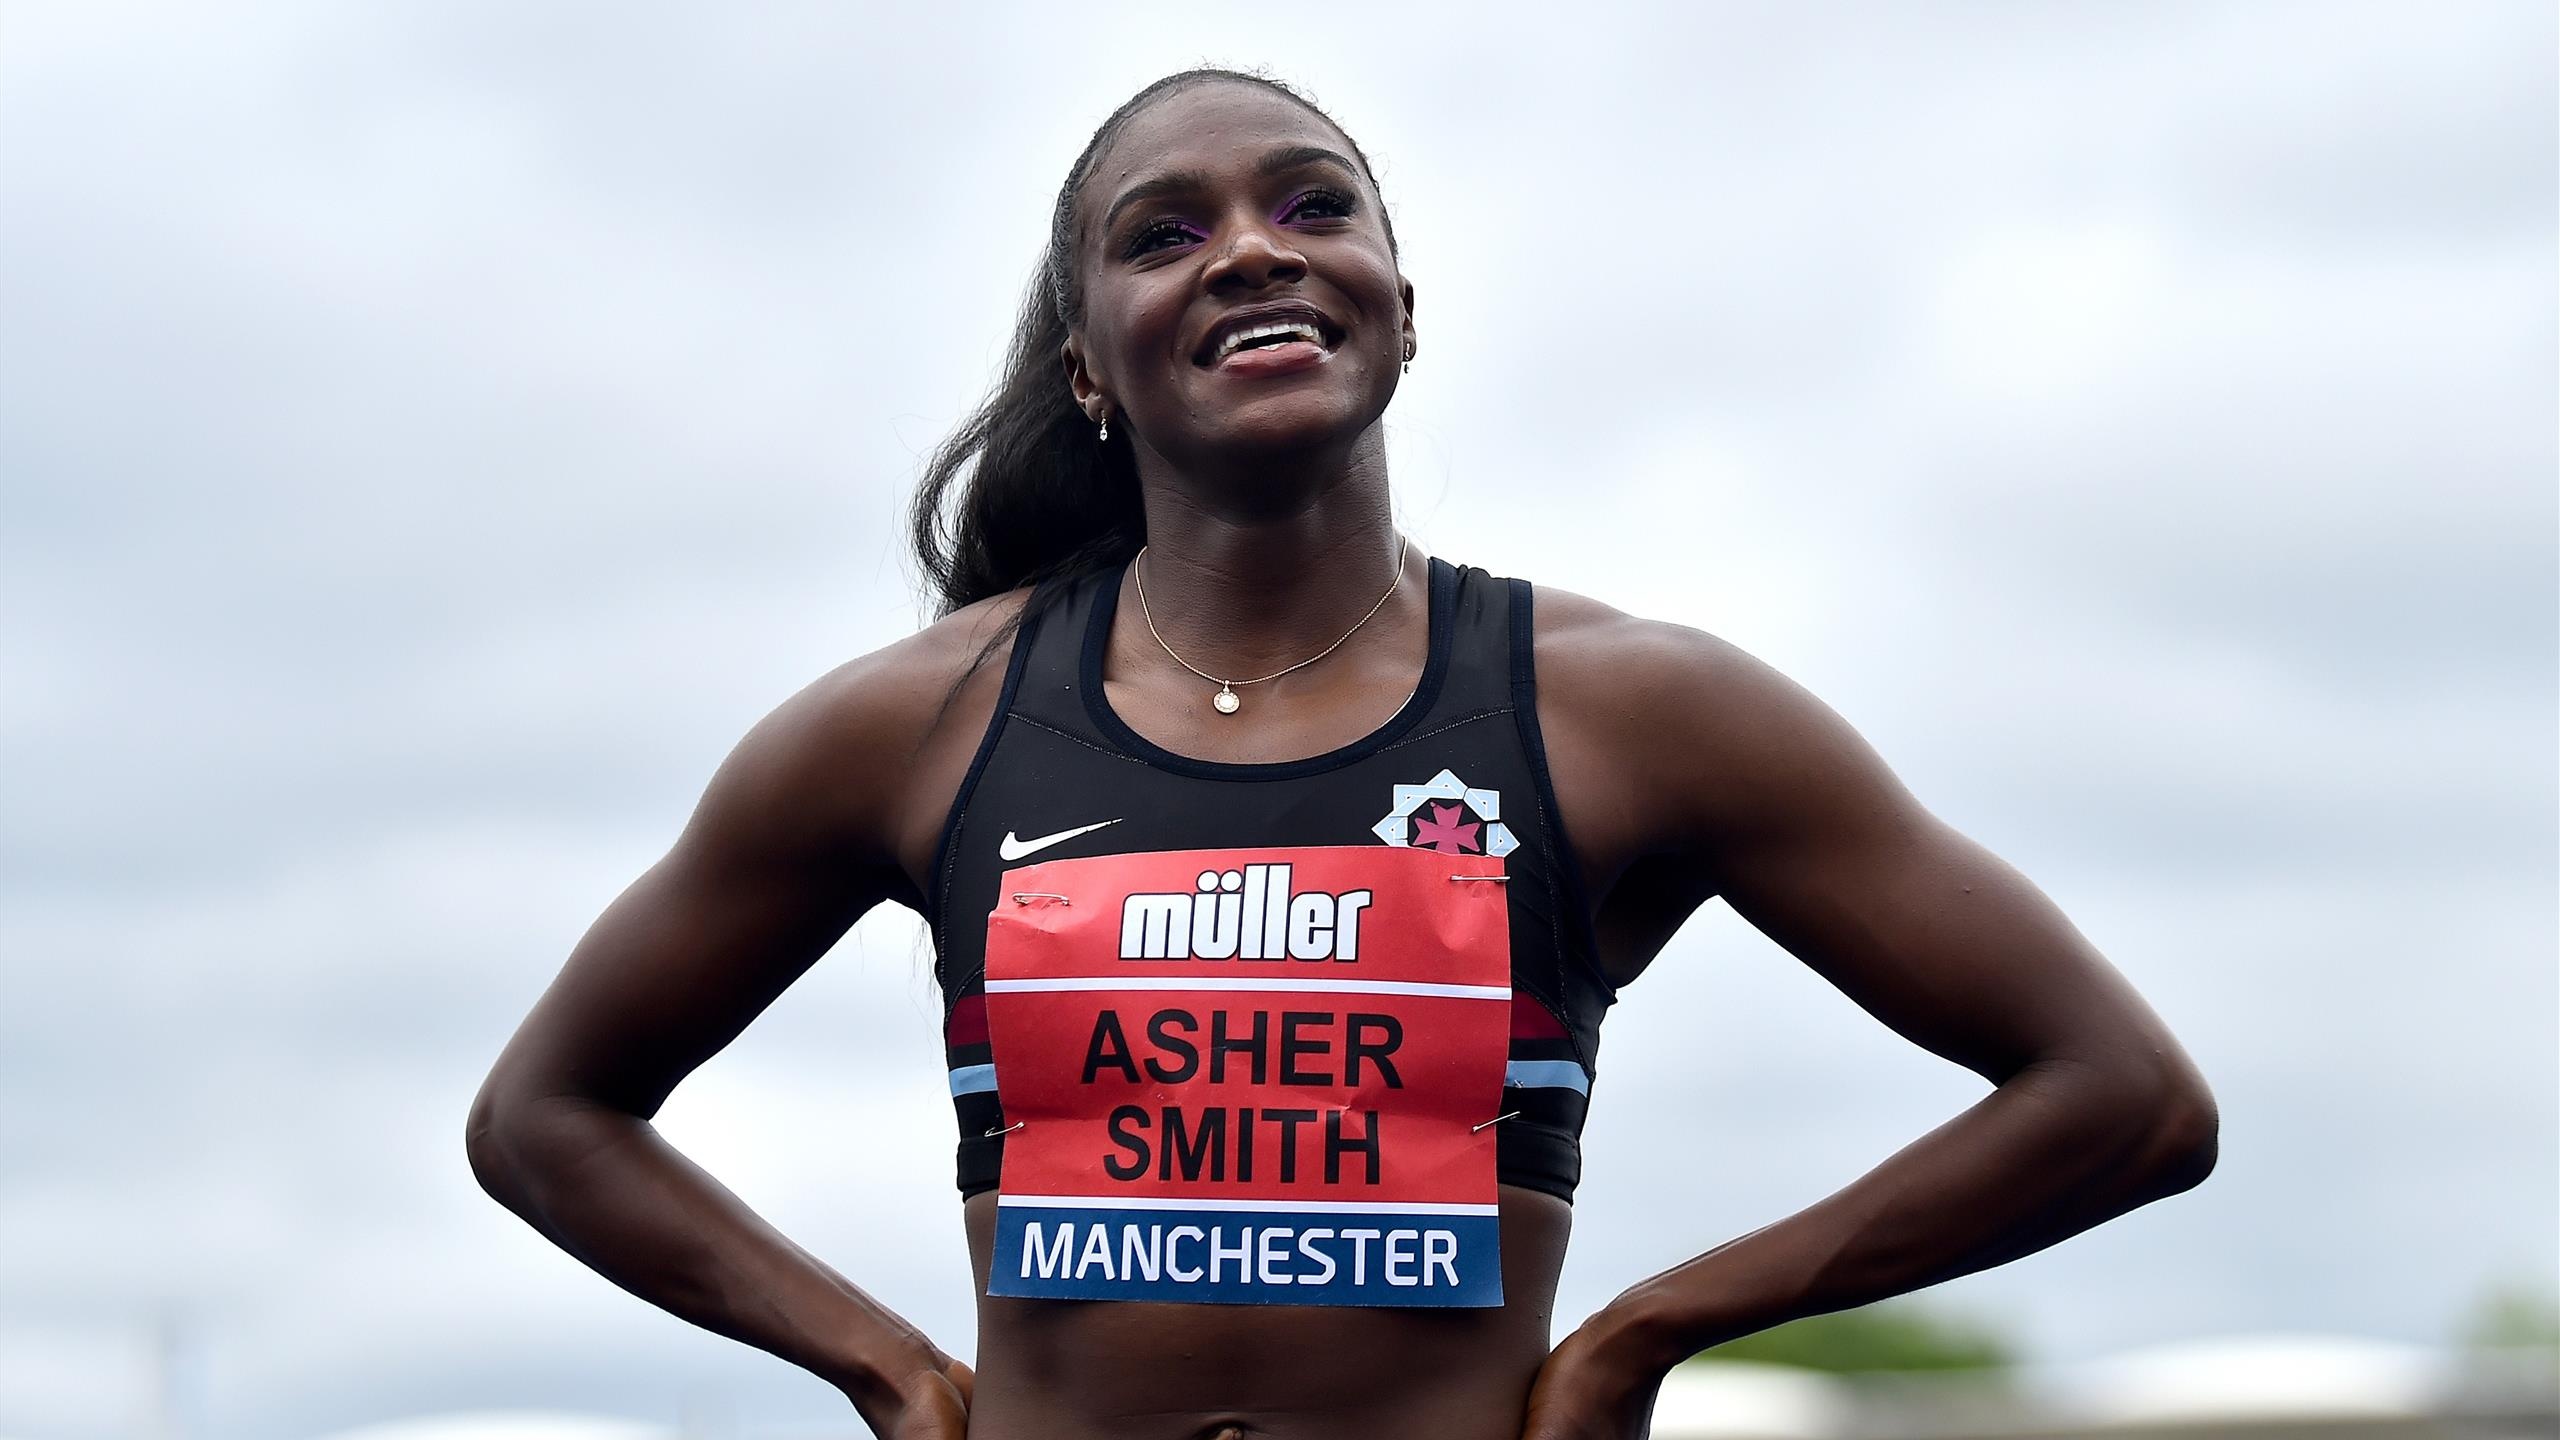 Racewalking: Dina Asher-Smith, The fastest British woman in recorded history. 2560x1440 HD Wallpaper.